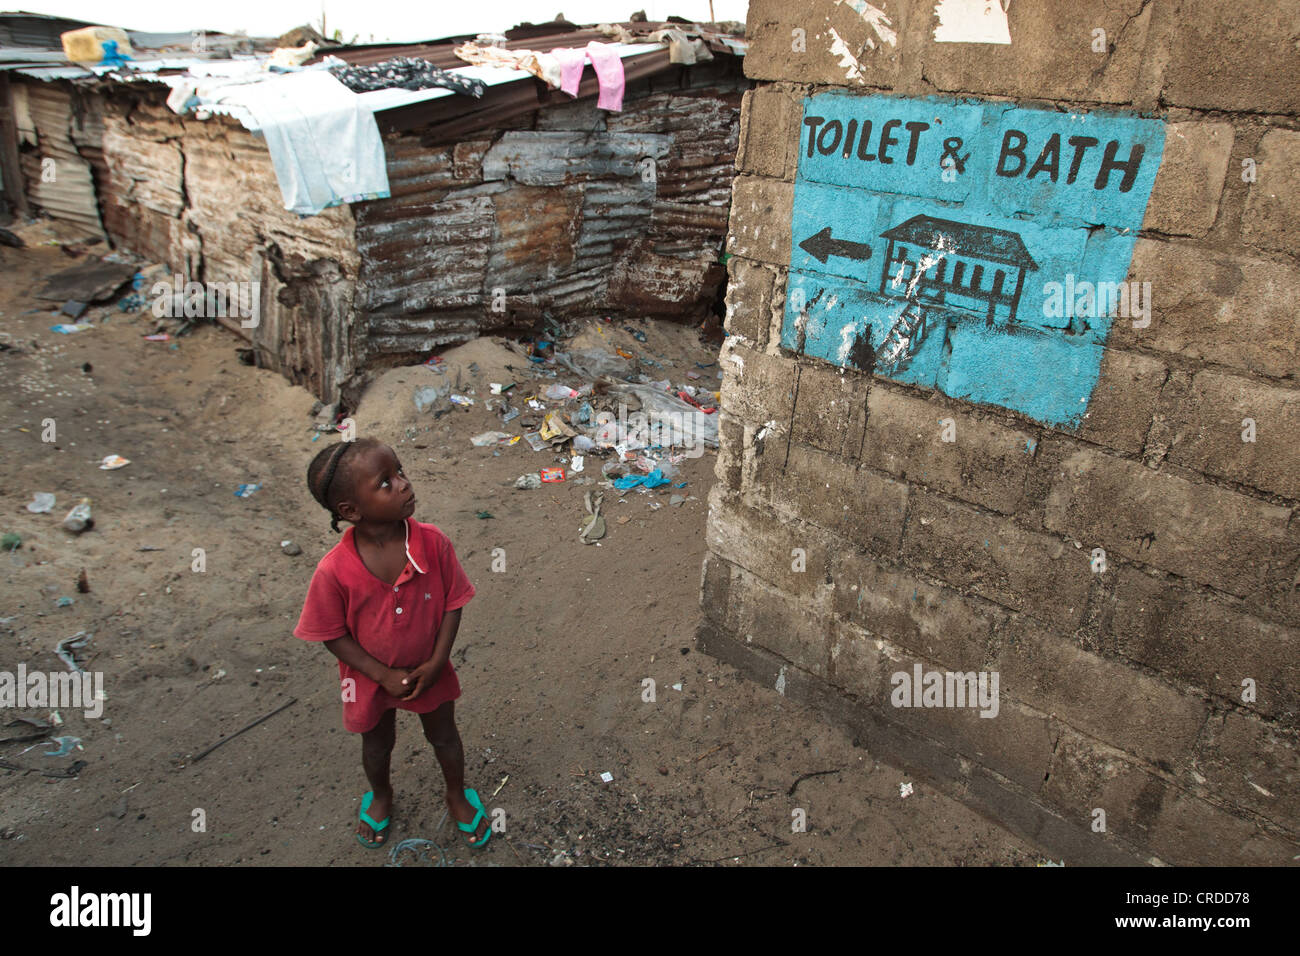 A girl stands under a painting that indicates directions to a nearby toilet and bath facility in the West Point slum in Monrovia Stock Photo